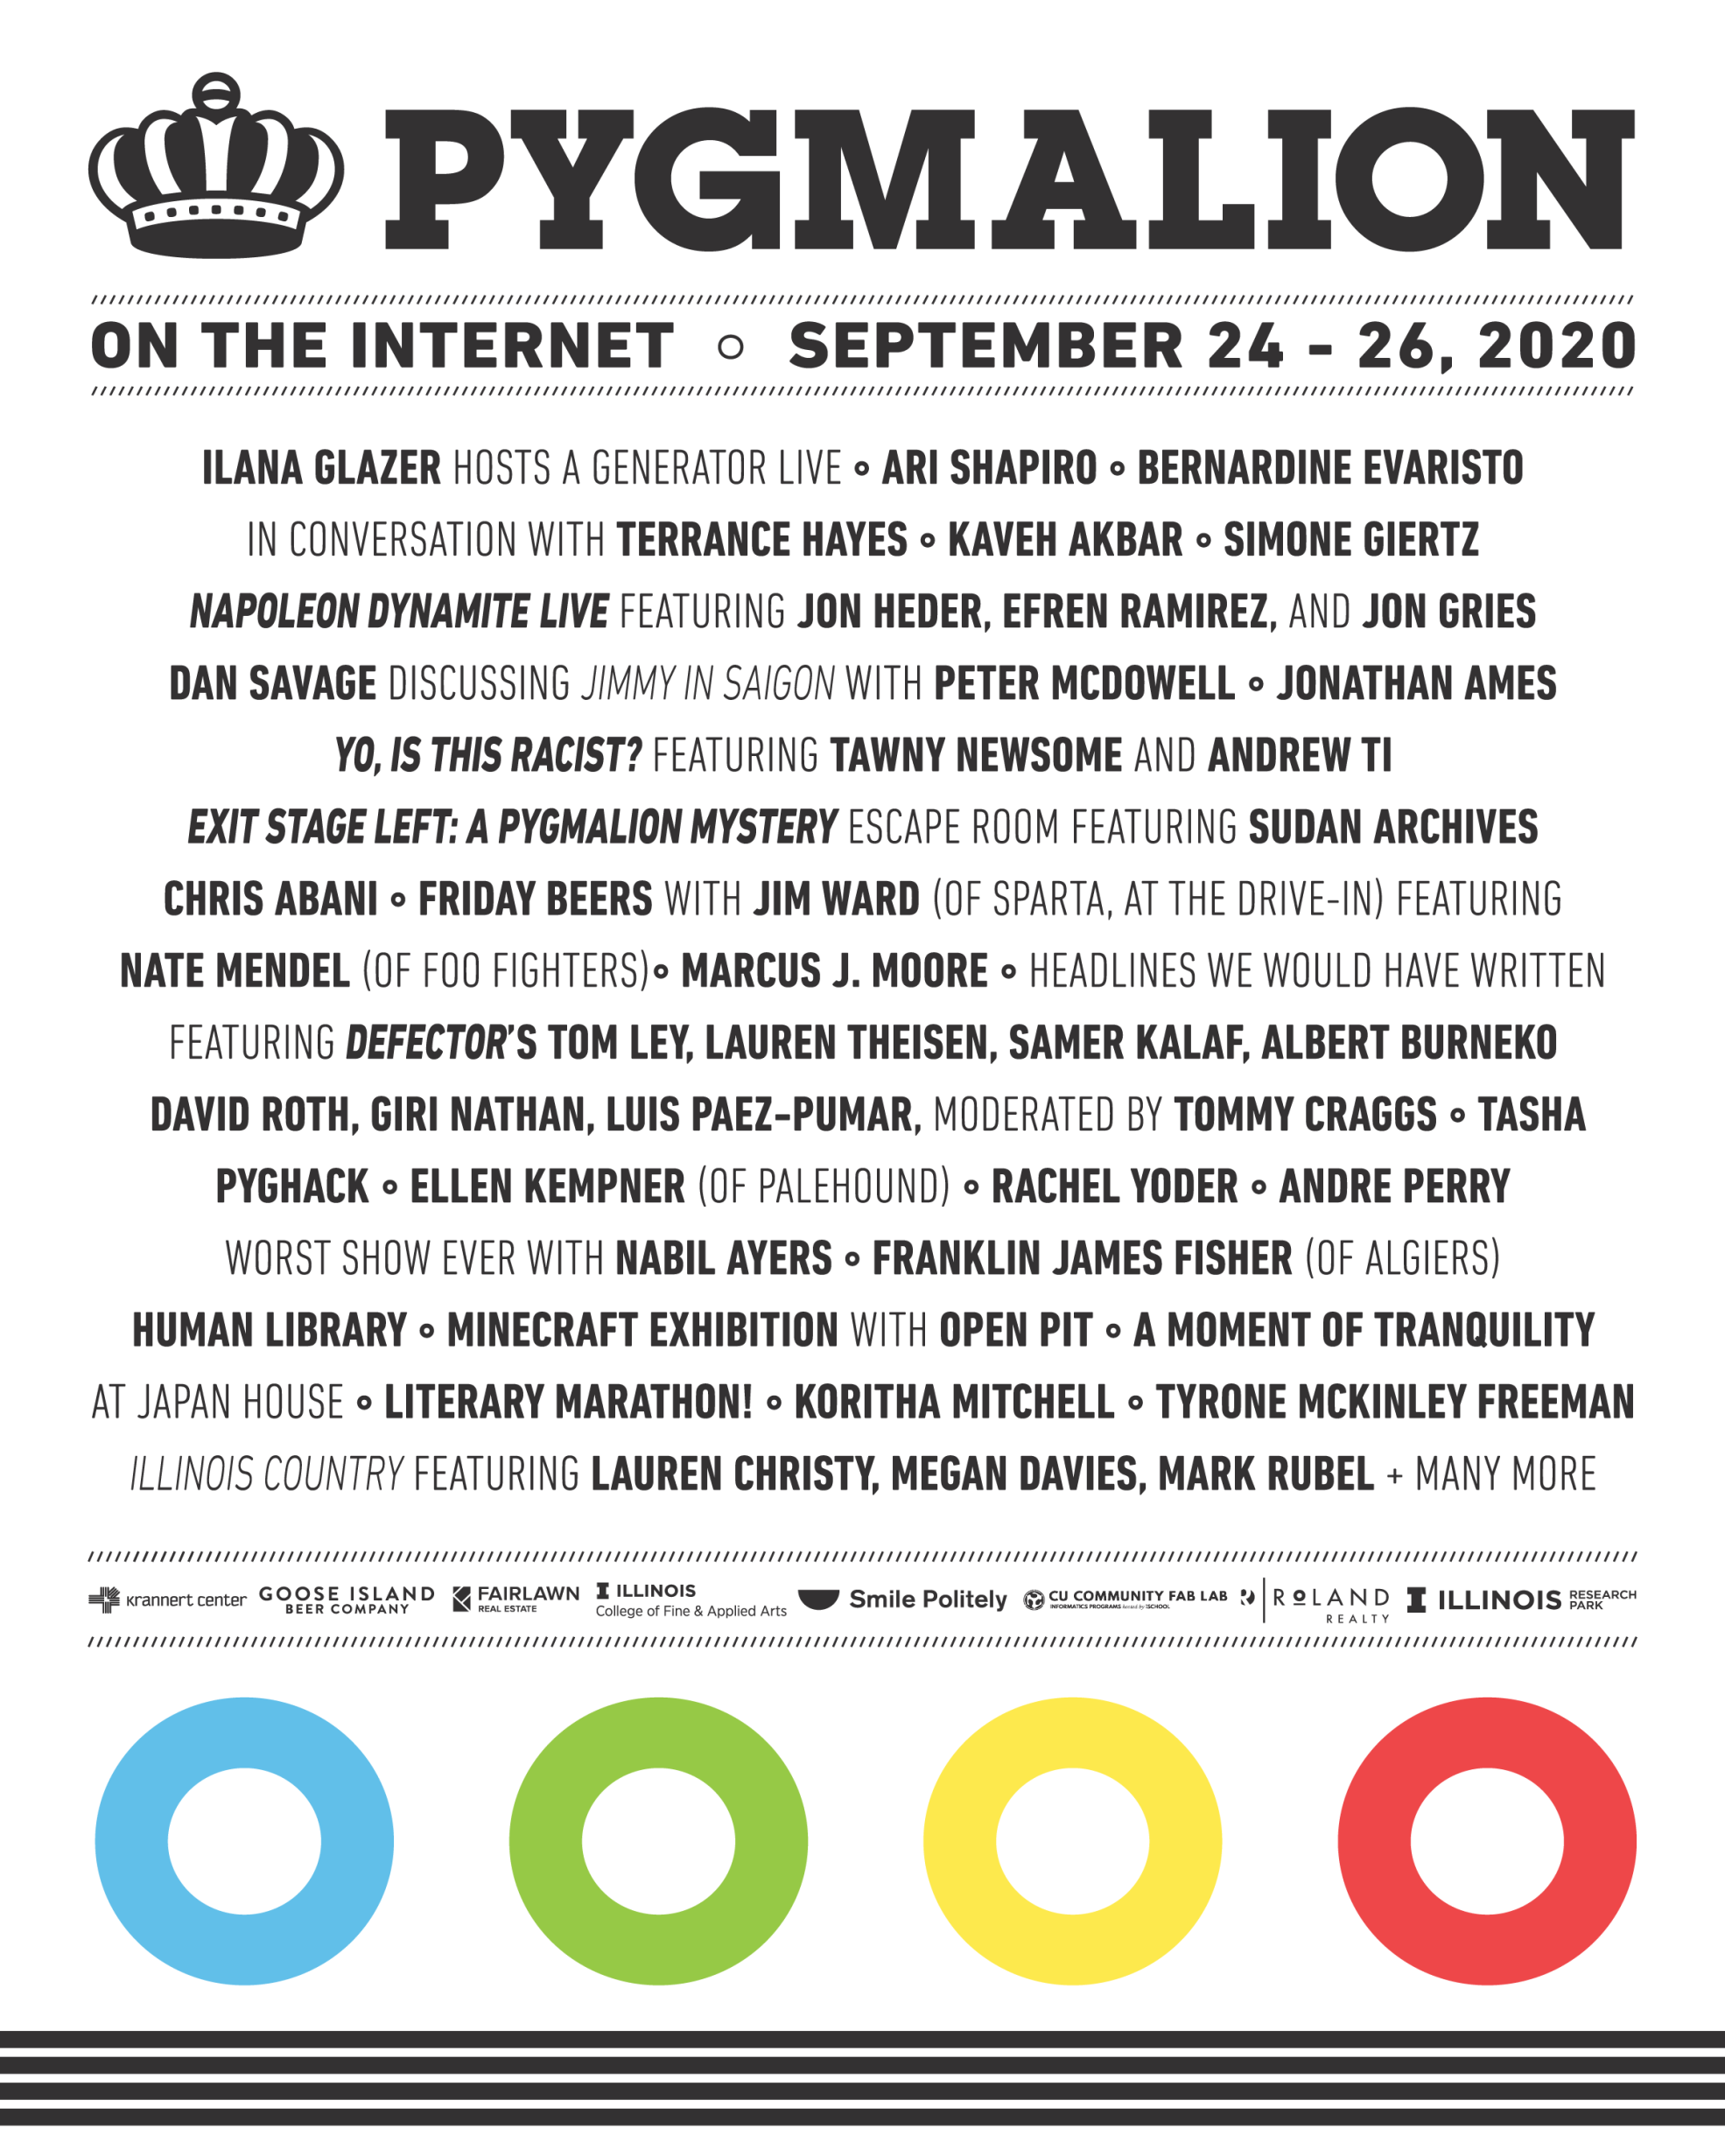 A white poster detailing a lineup of performers and guests, in black text, there are four colorful circles at the bottom. Image provided by PYGMALION.